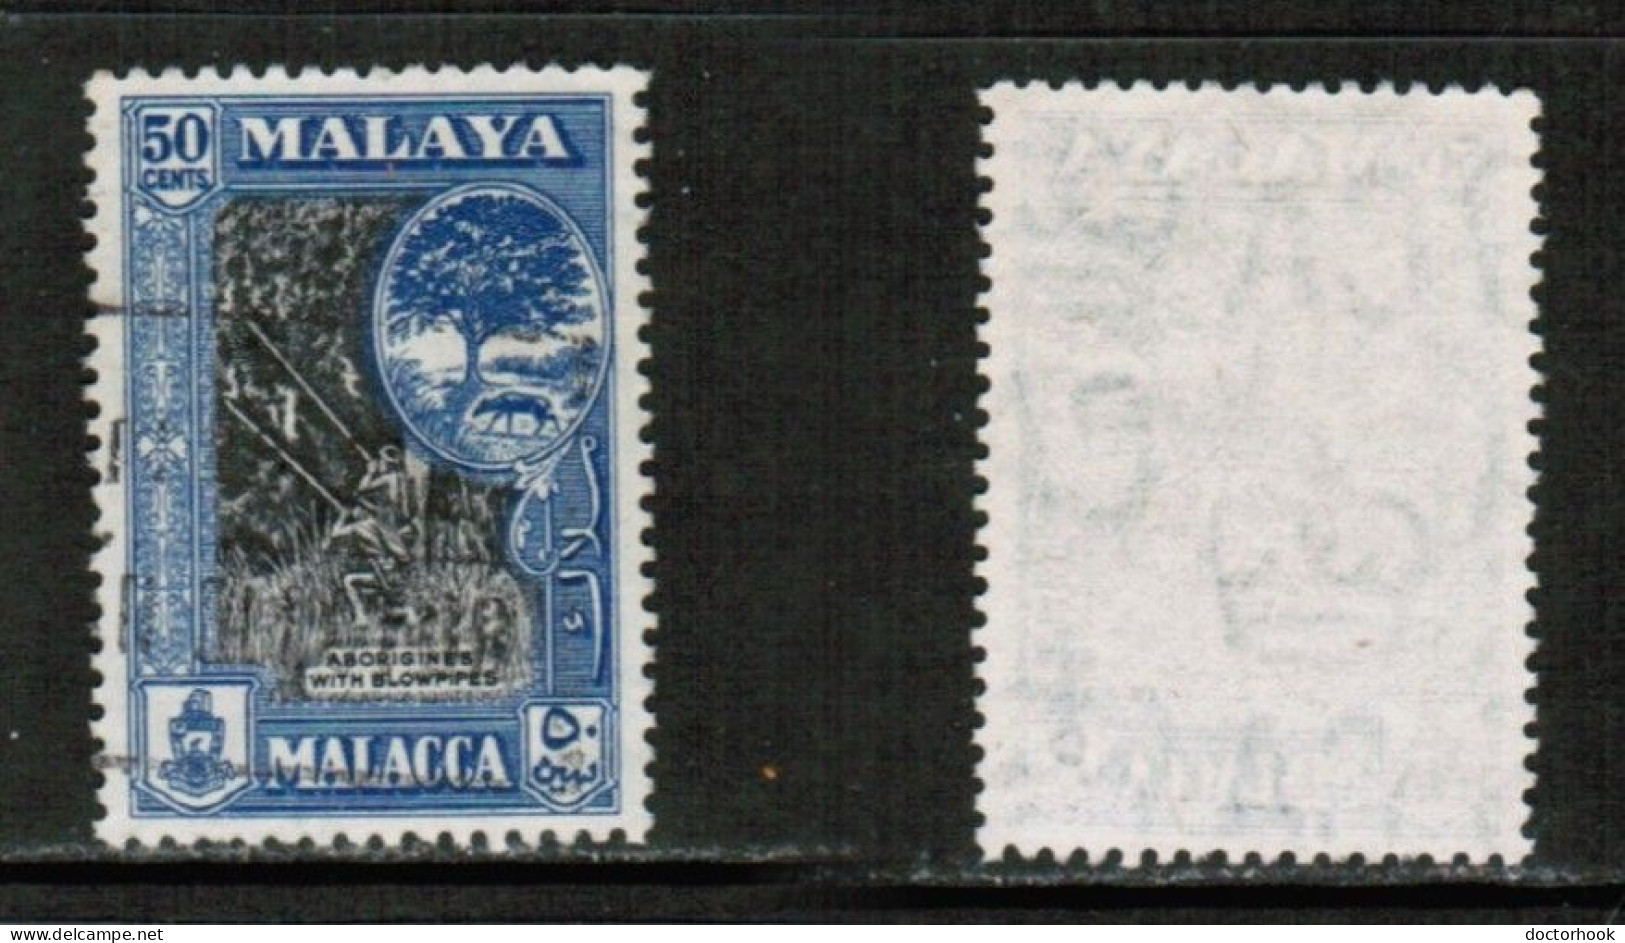 MALAYA---Malacca   Scott # 52 USED (CONDITION AS PER SCAN) (Stamp Scan # 897-14) - Malacca